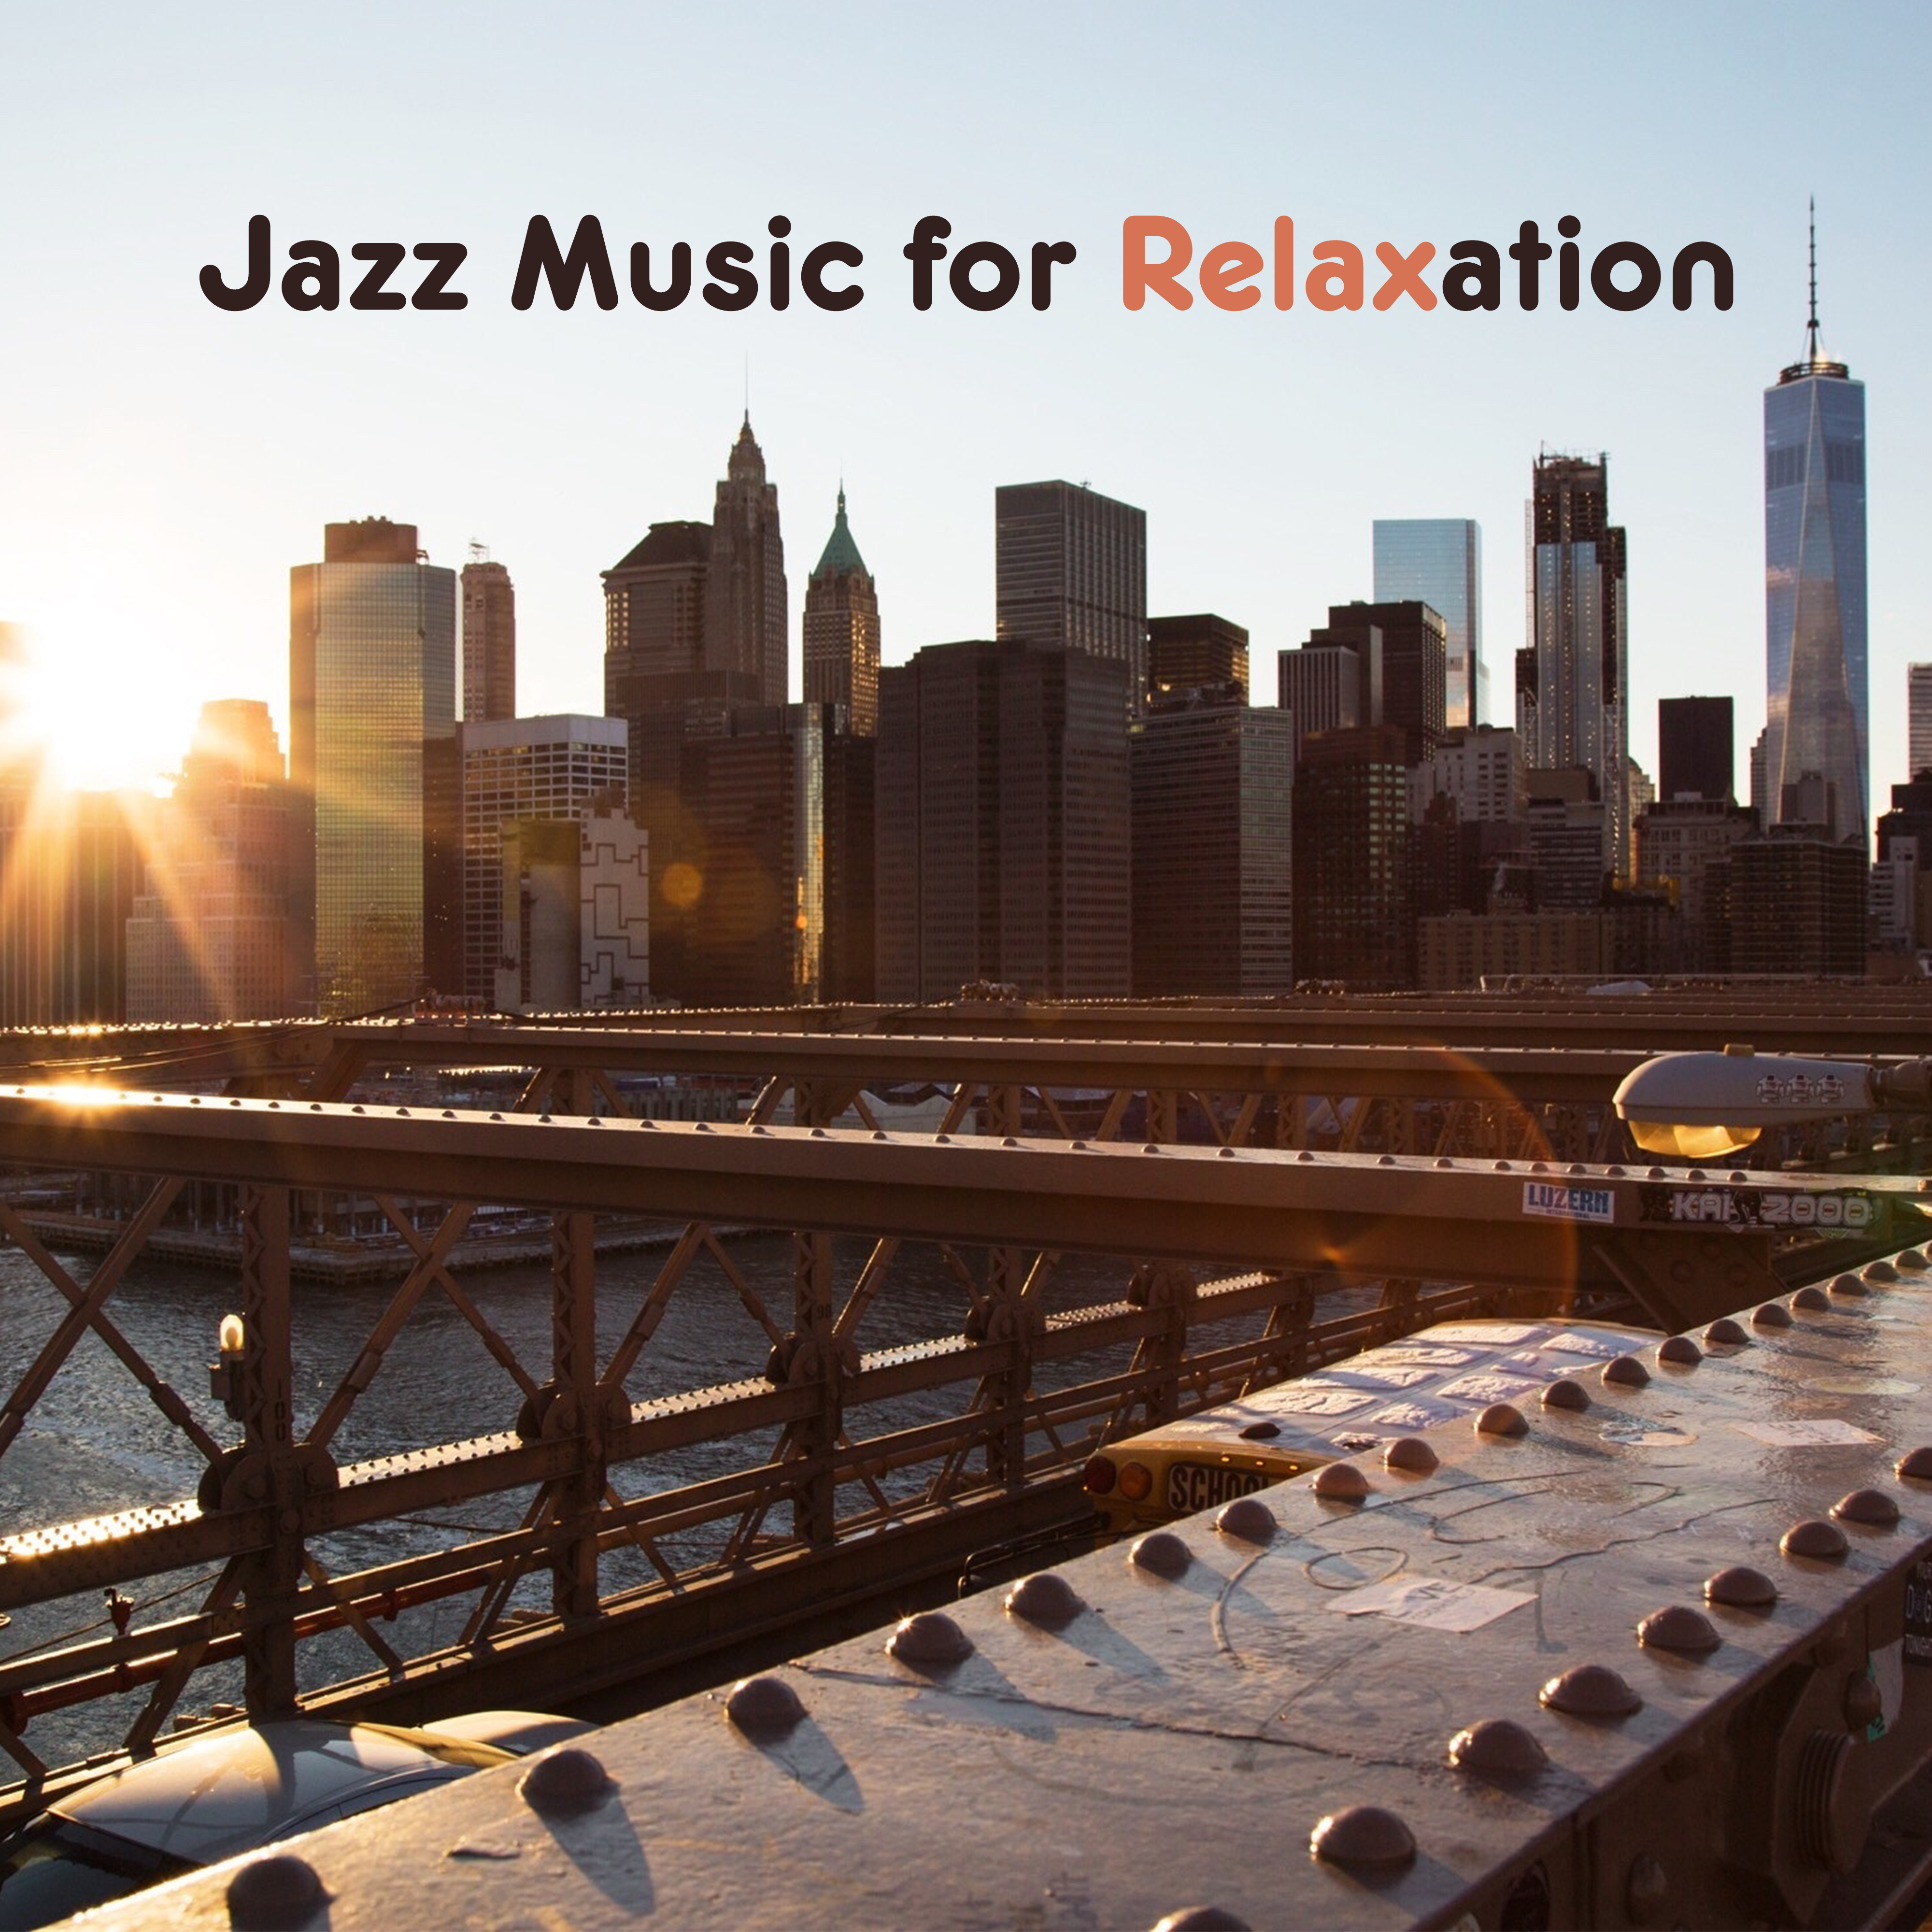 Jazz Music for Relaxation  Easy Listening, Peaceful Melodies, Smooth Jazz Sounds, Instrumental Music, Evening Rest